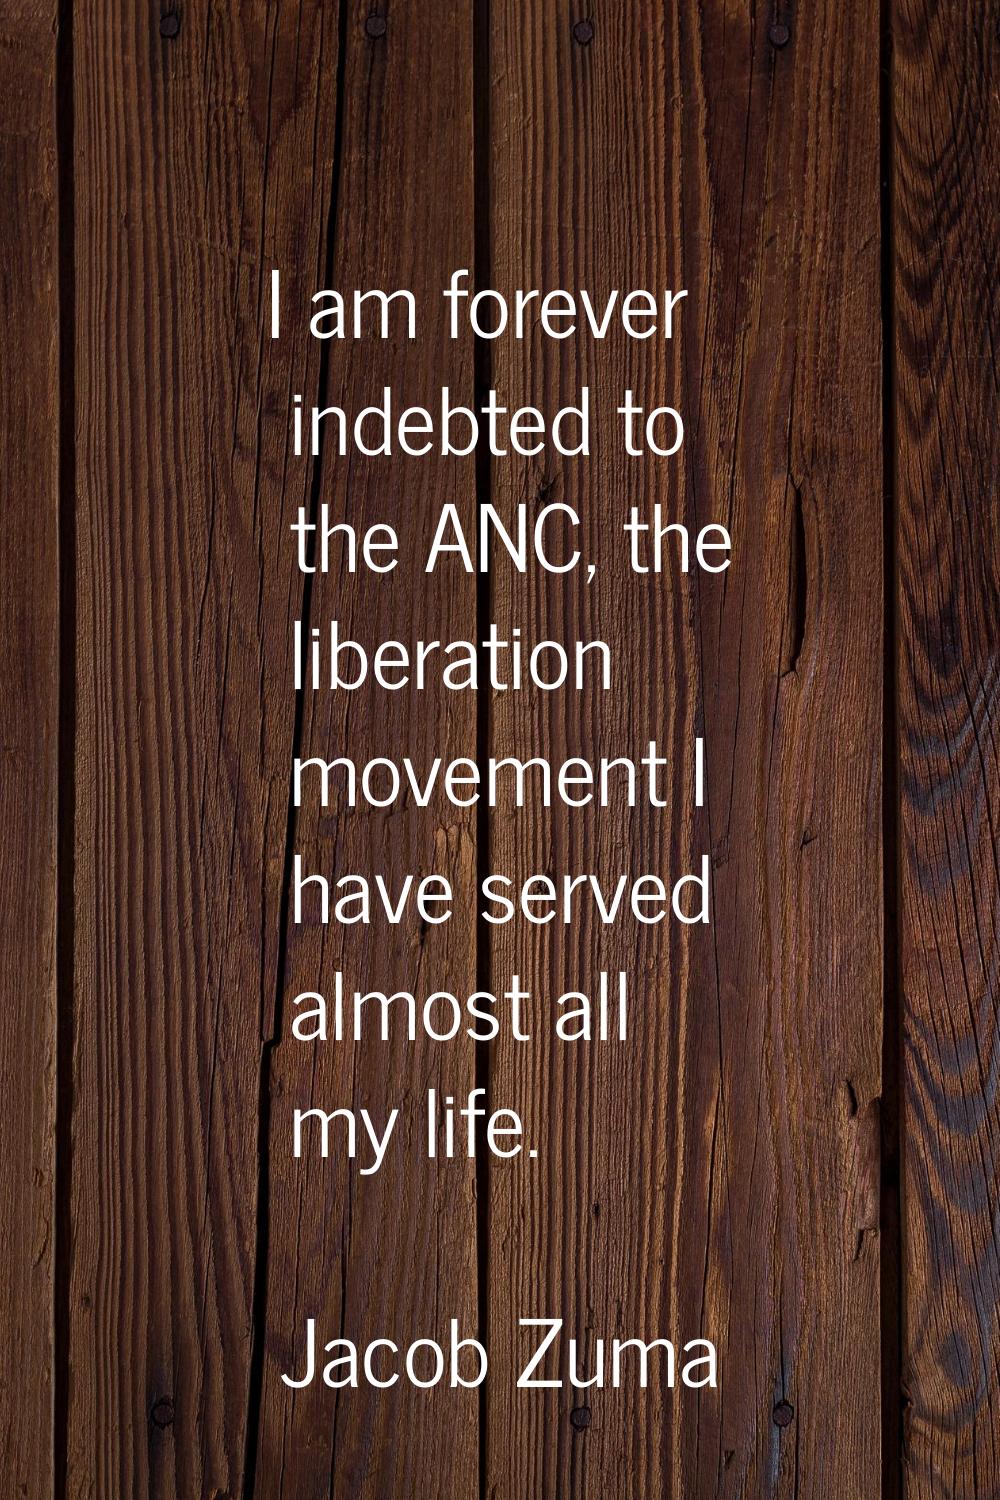 I am forever indebted to the ANC, the liberation movement I have served almost all my life.